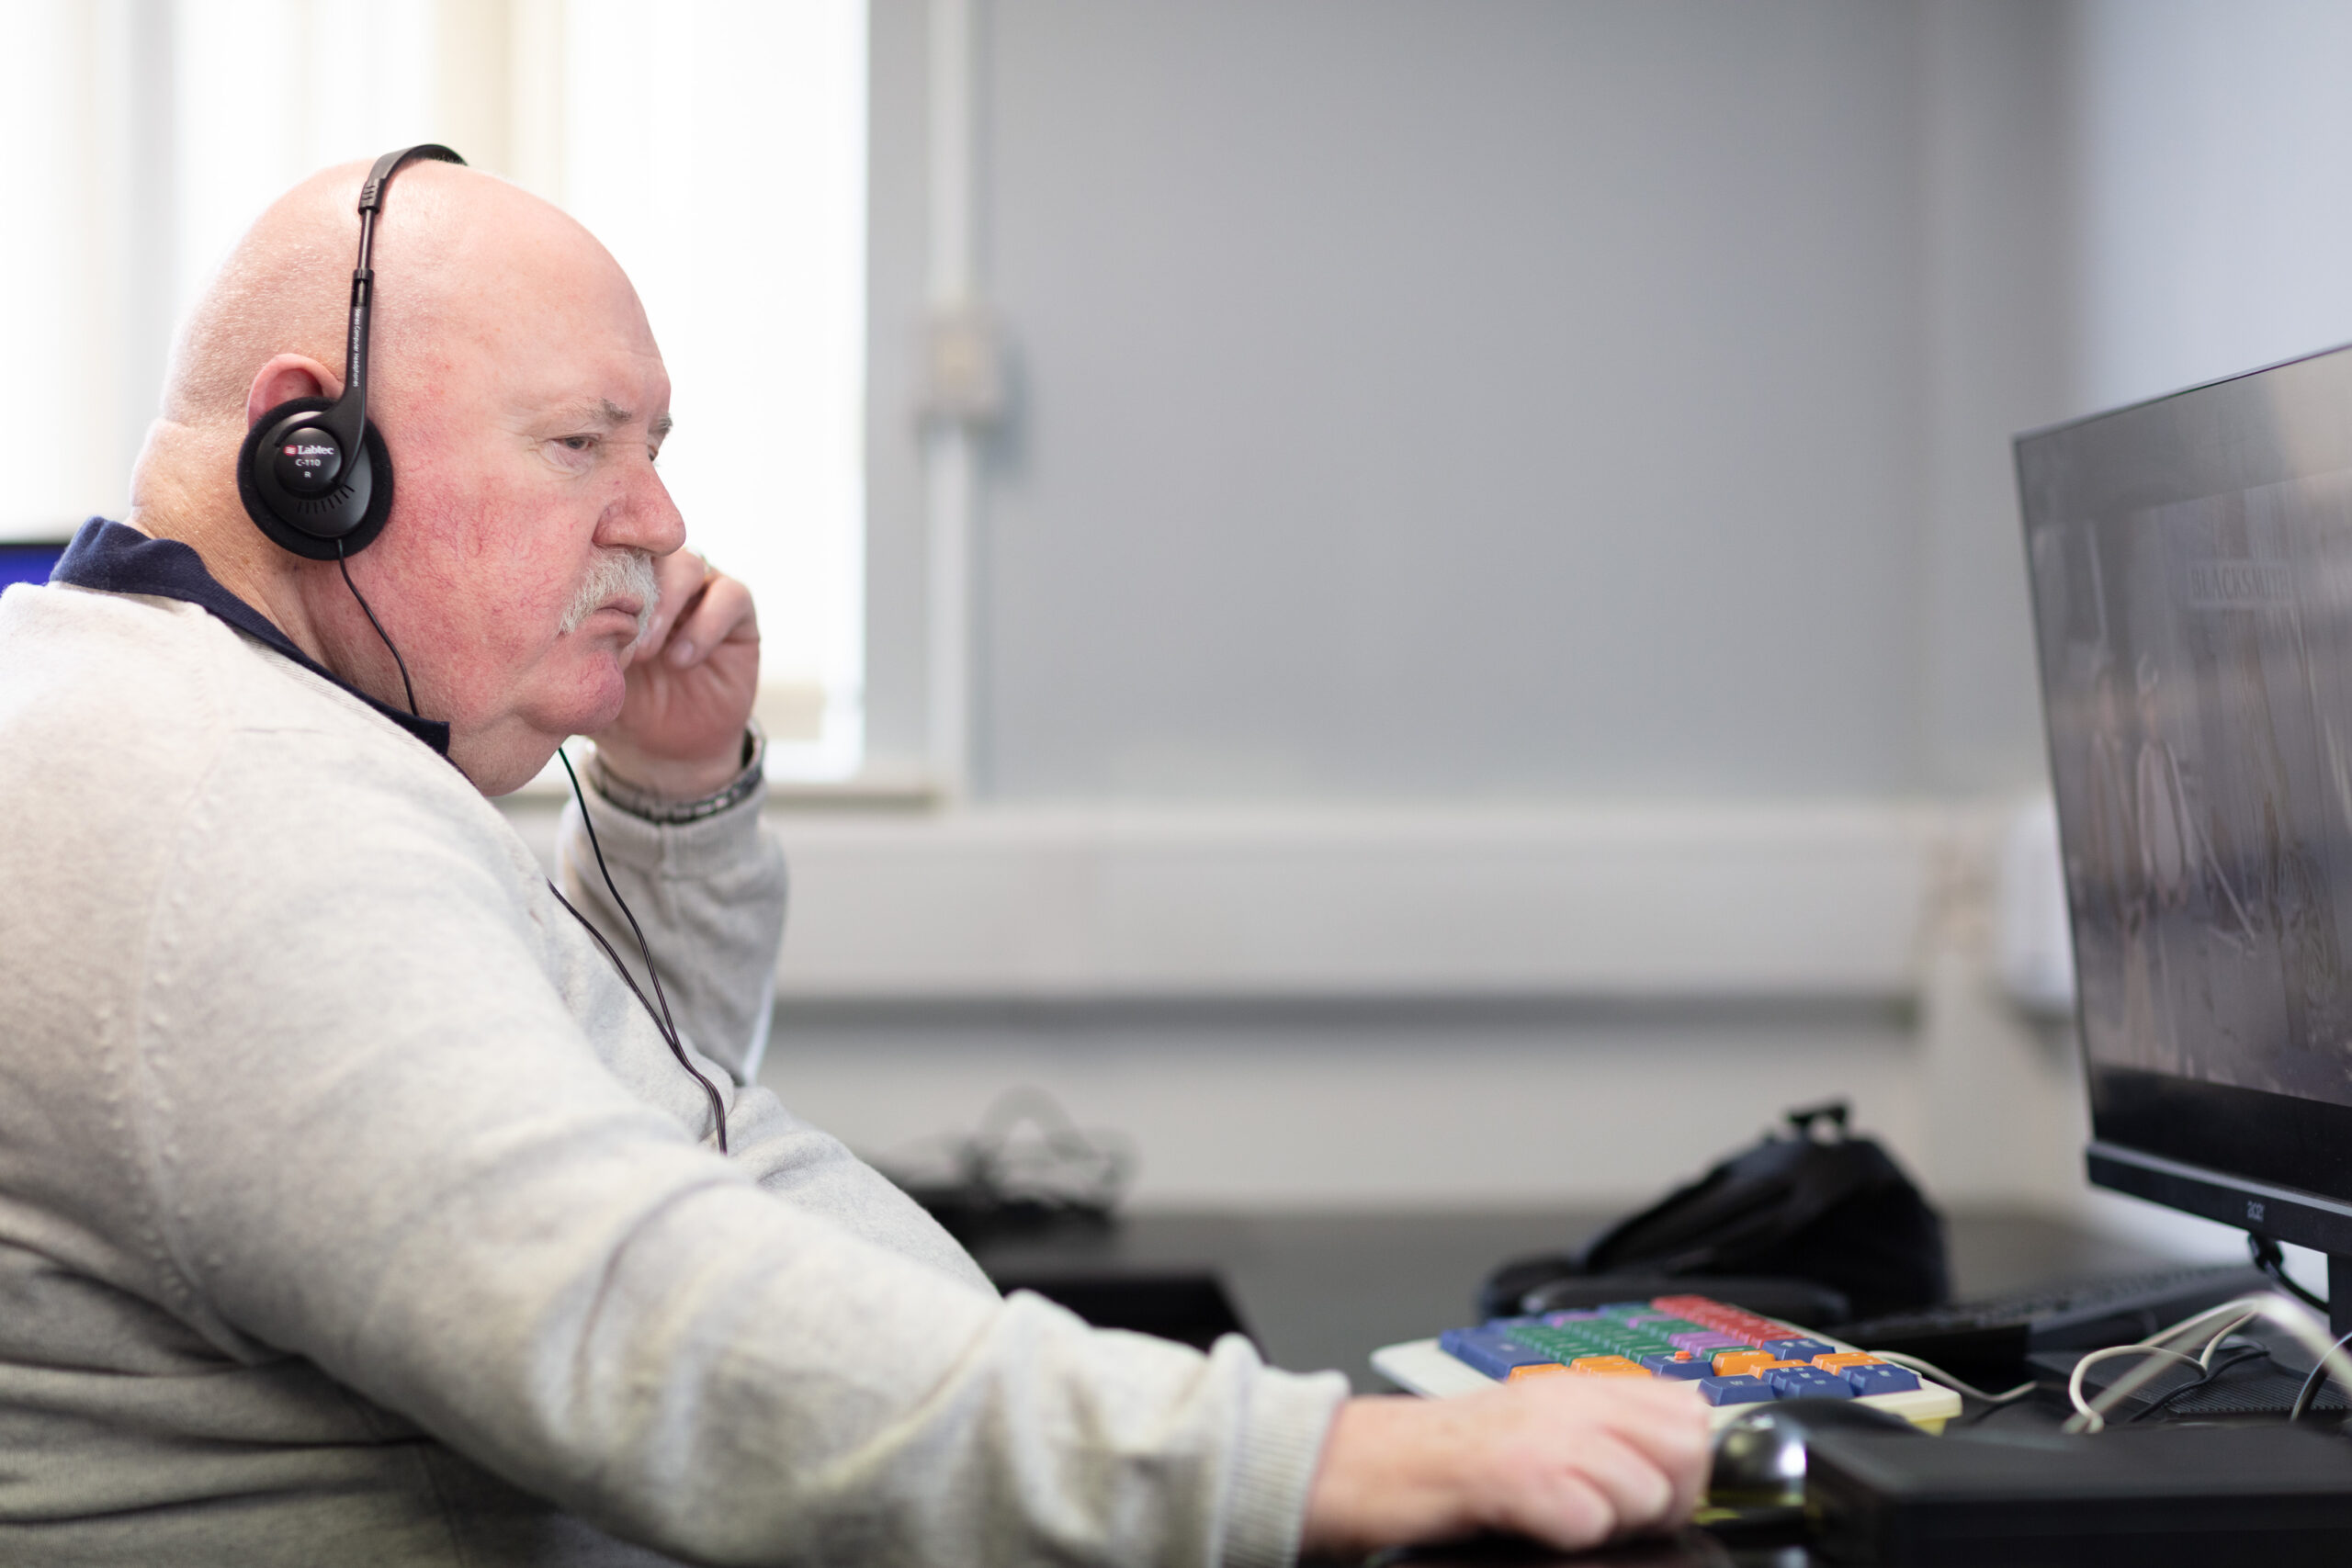 An Vision Ireland service user sitting at a computer using accessibility features as he wears headphones